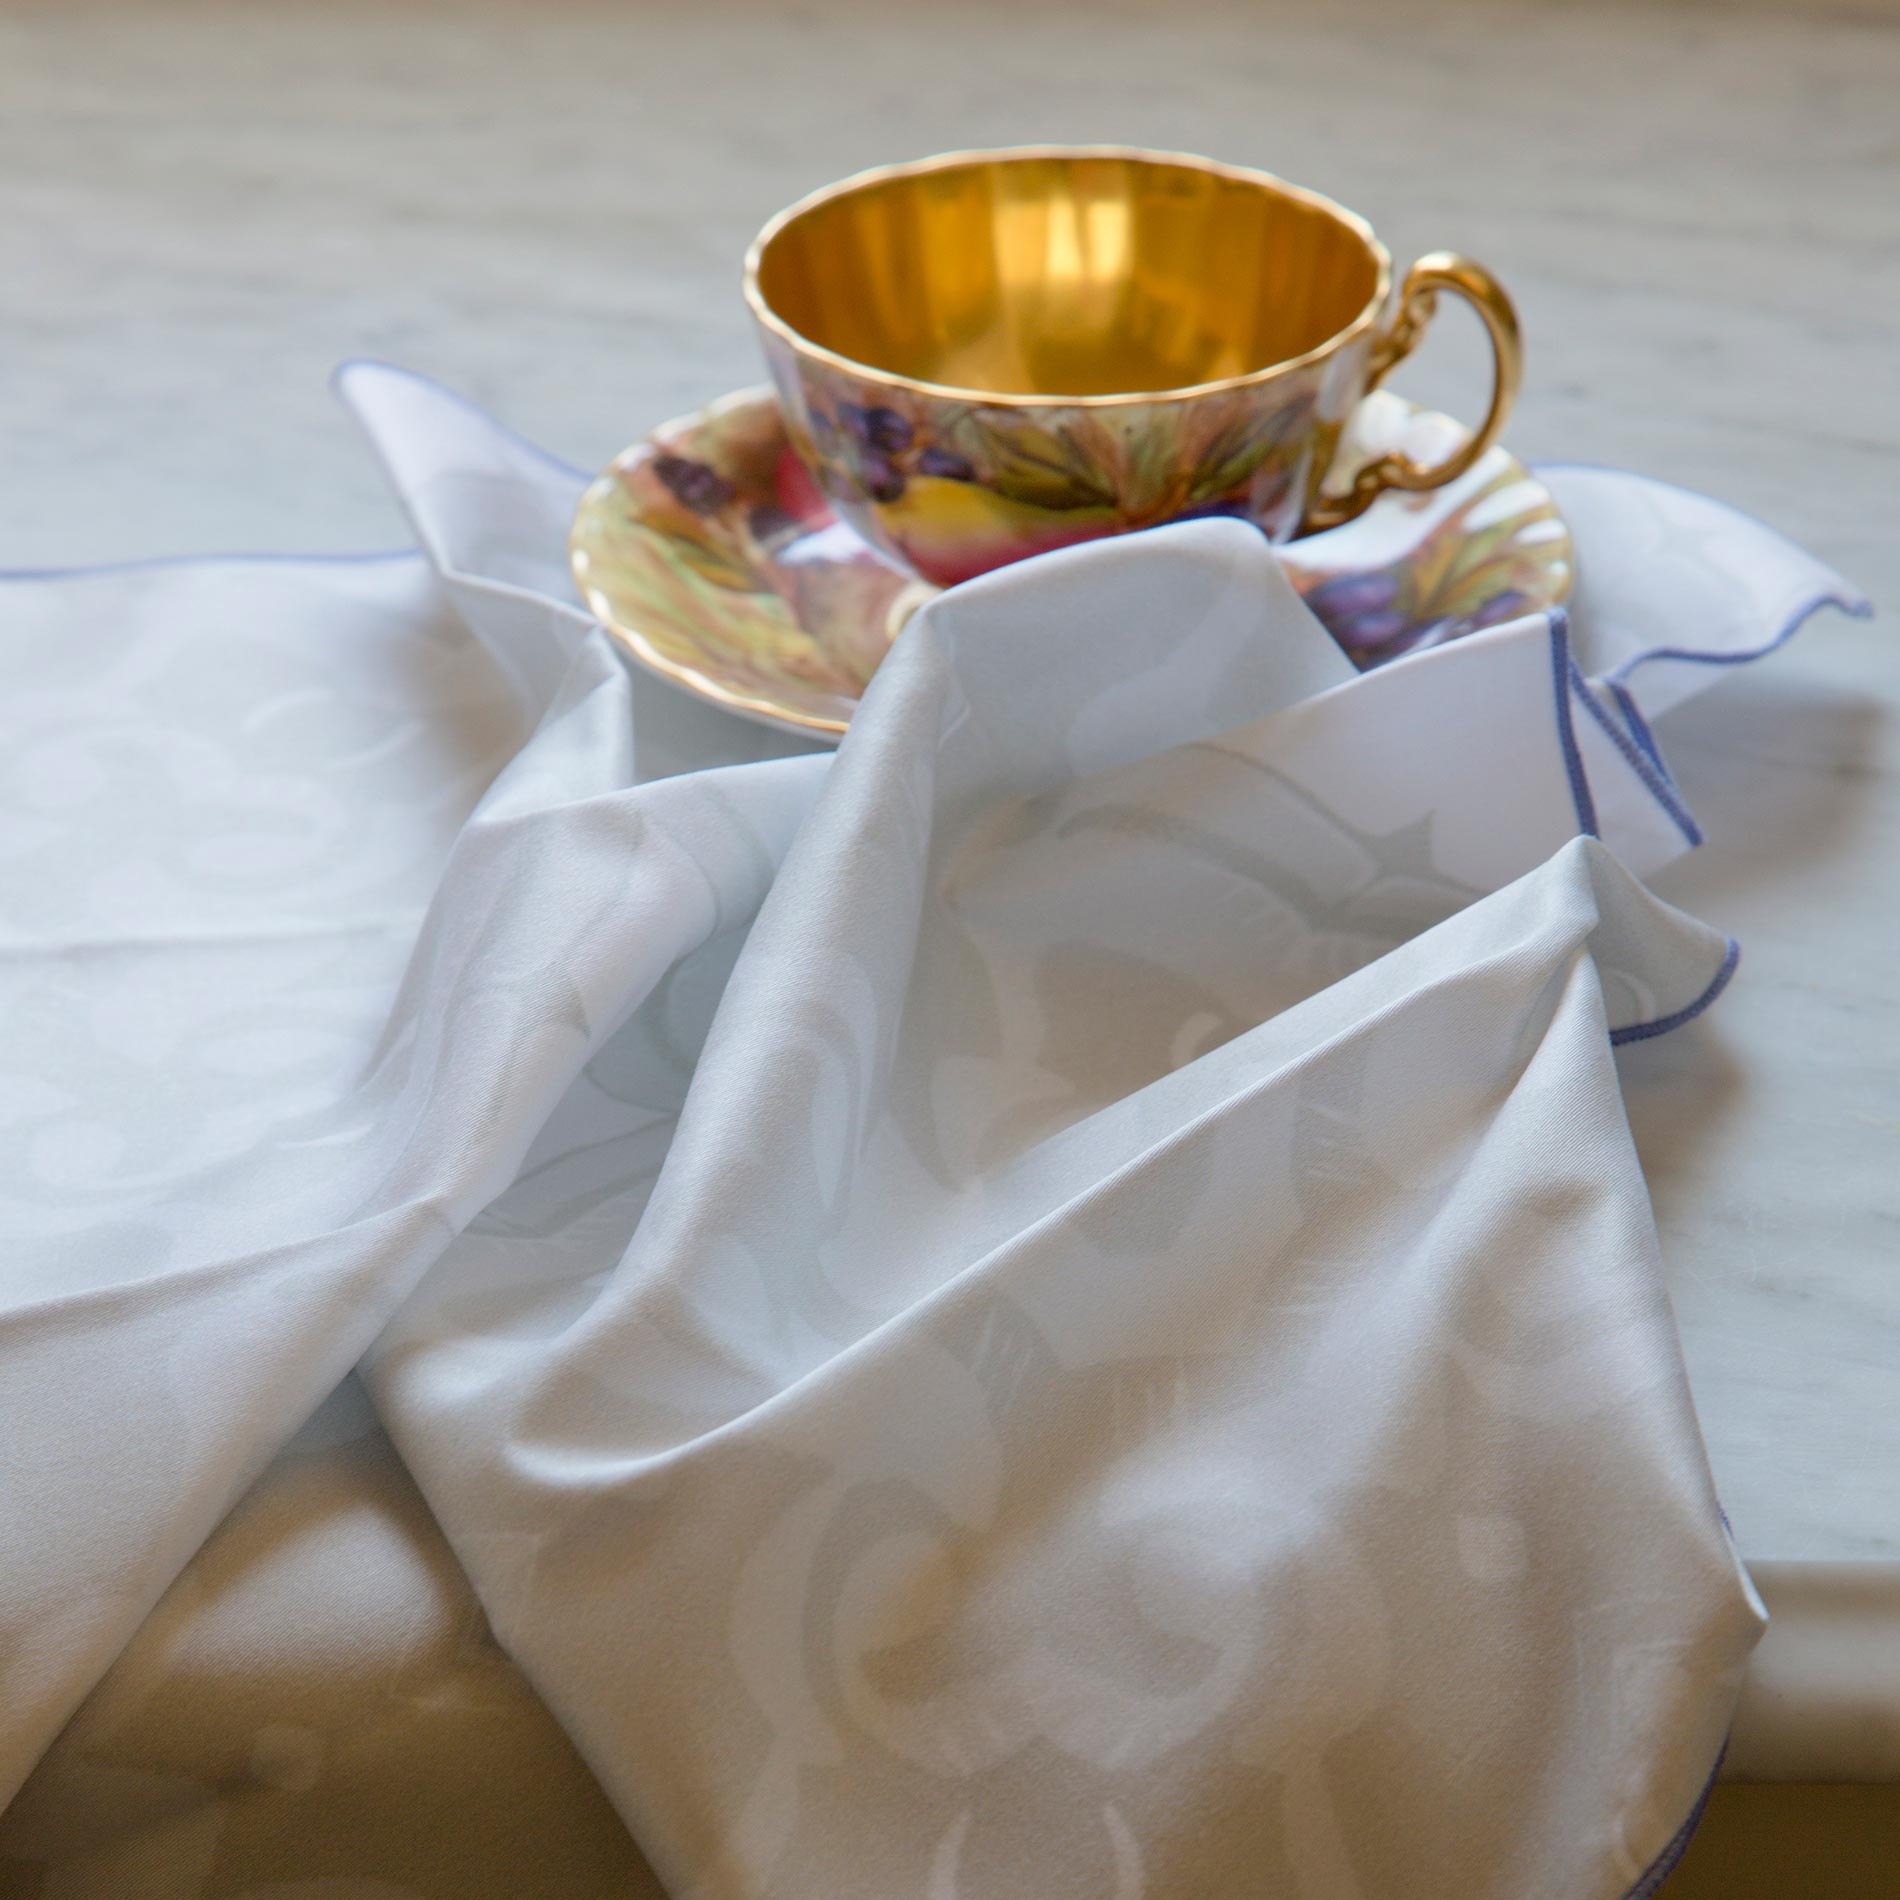 Alexandria Cloth Dinner Napkins in Taupe - Pearl & Maude Home